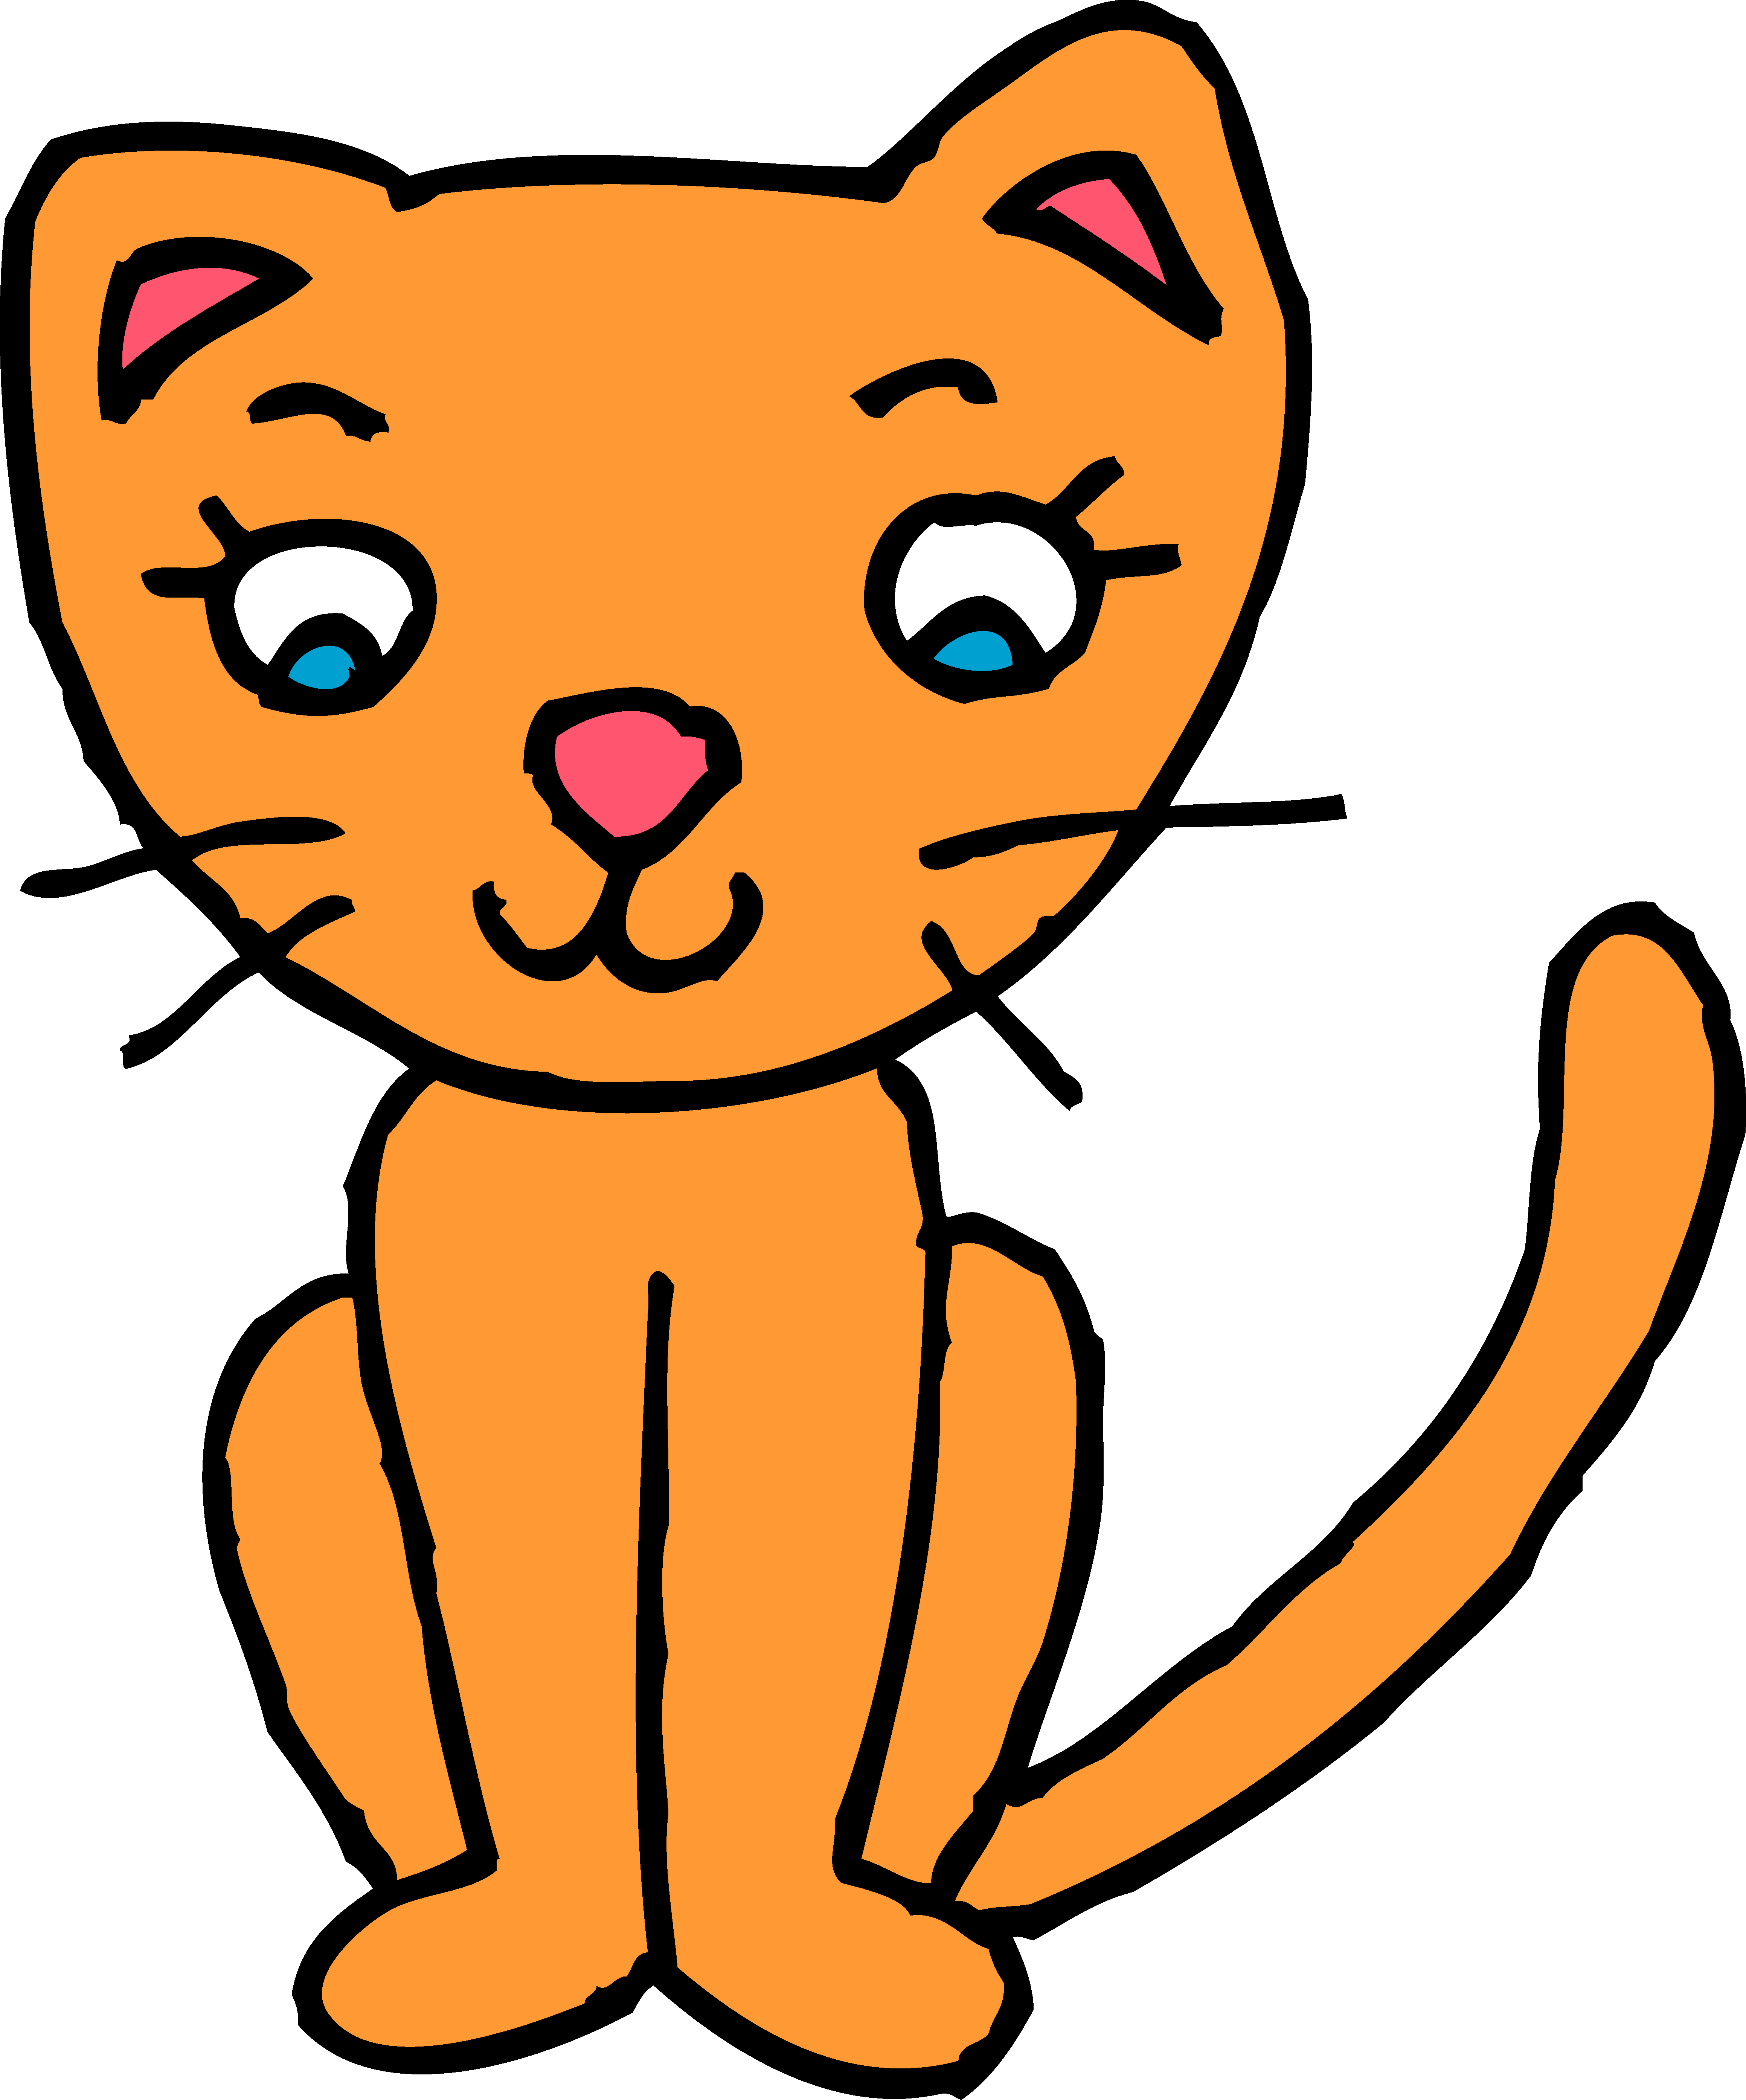 . Kittens clipart one cat